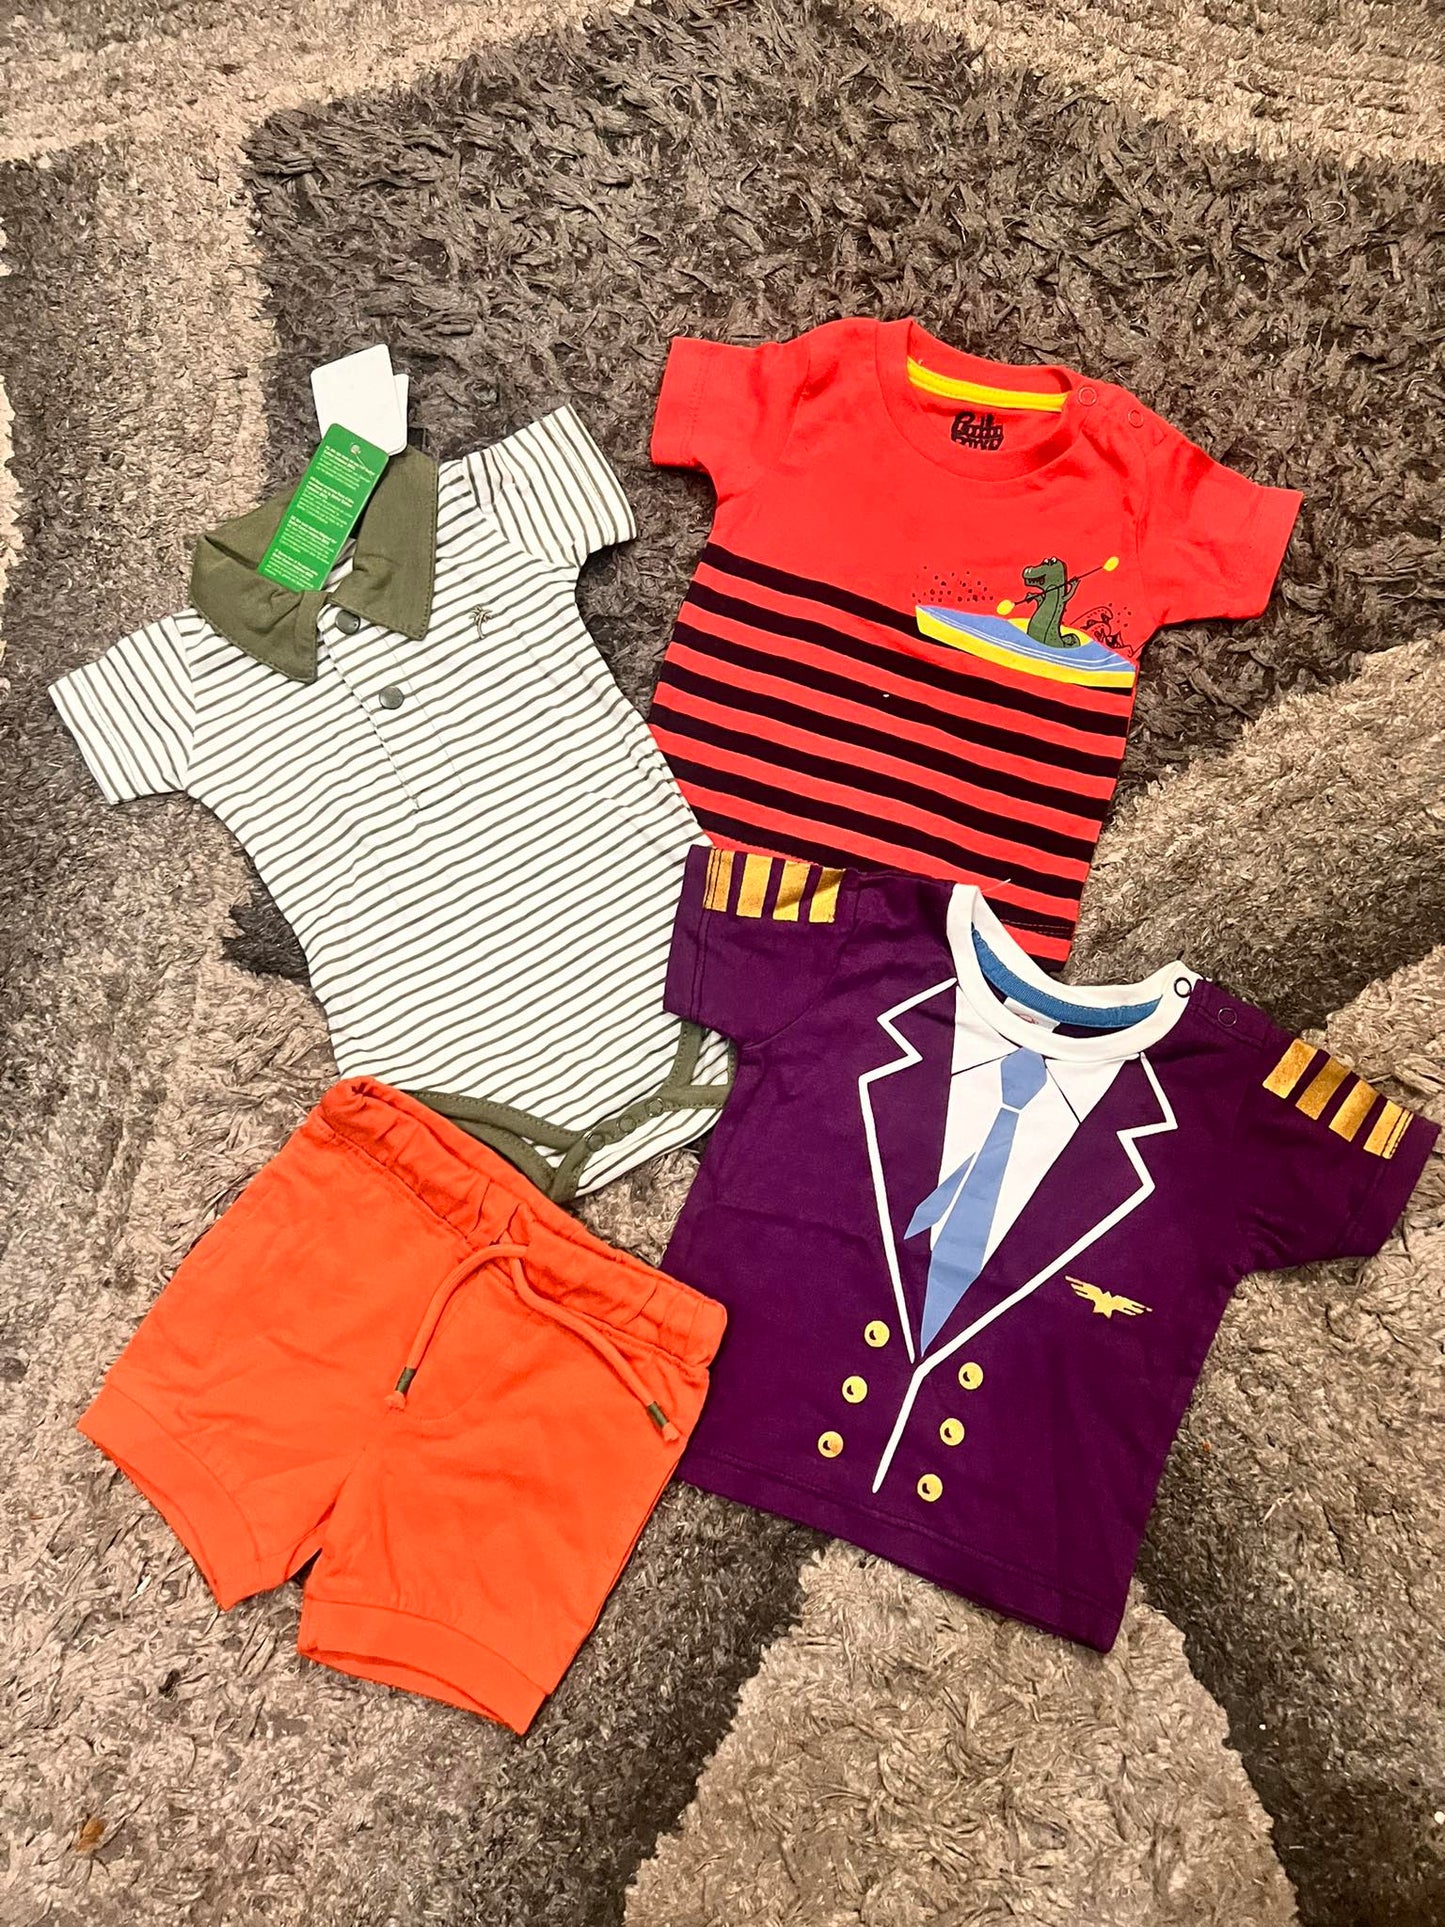 Kids Infant Boys Summer Sale Pack of 4: 2 Shirts One Romper one Short original Minnie Minors 0-3 Months